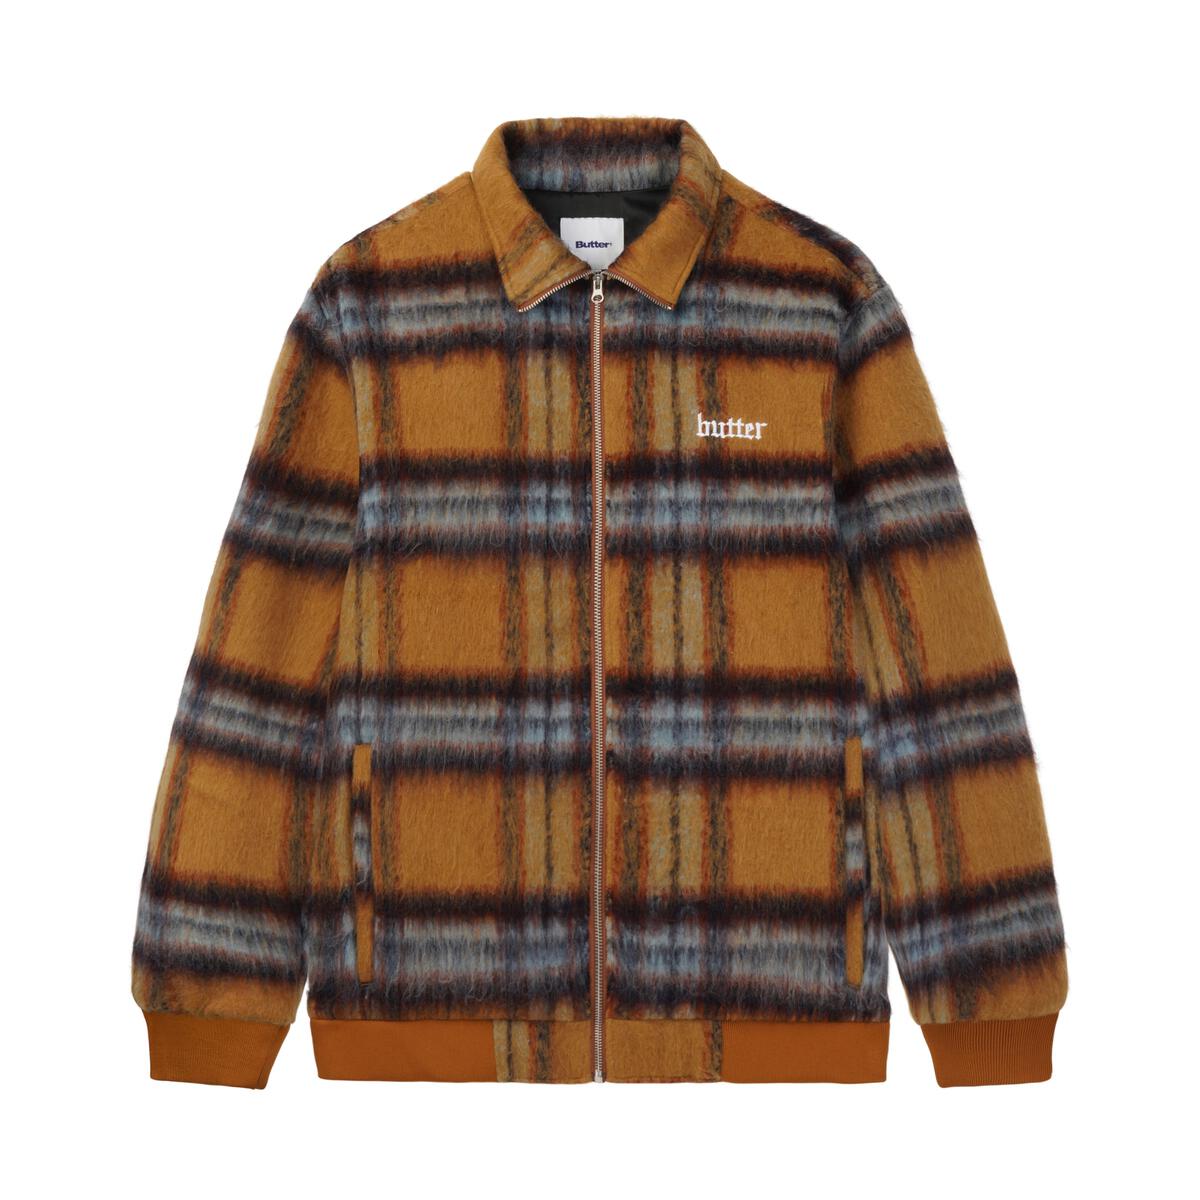 BUTTERGOODS HAIRY PLAID JACKET BROWN